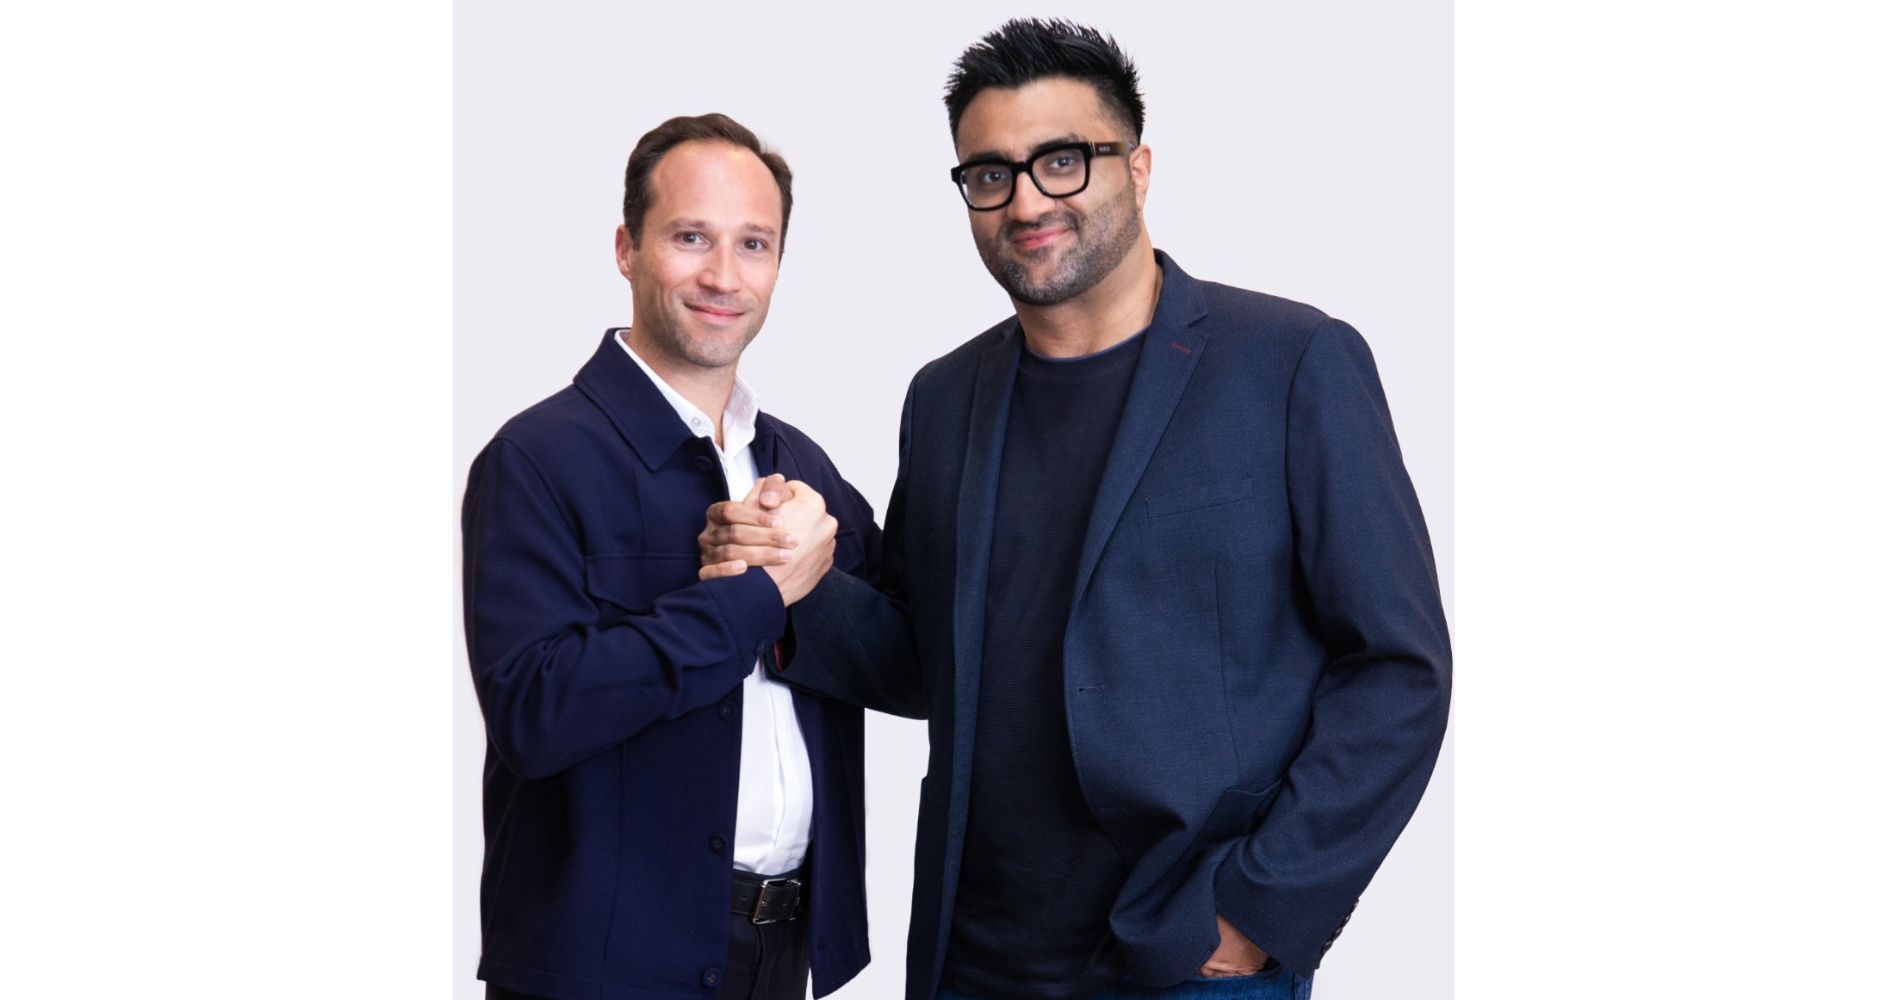 Ykone Agency Acquires Barcode, Solidifying Position In Indian Influencer Marketing